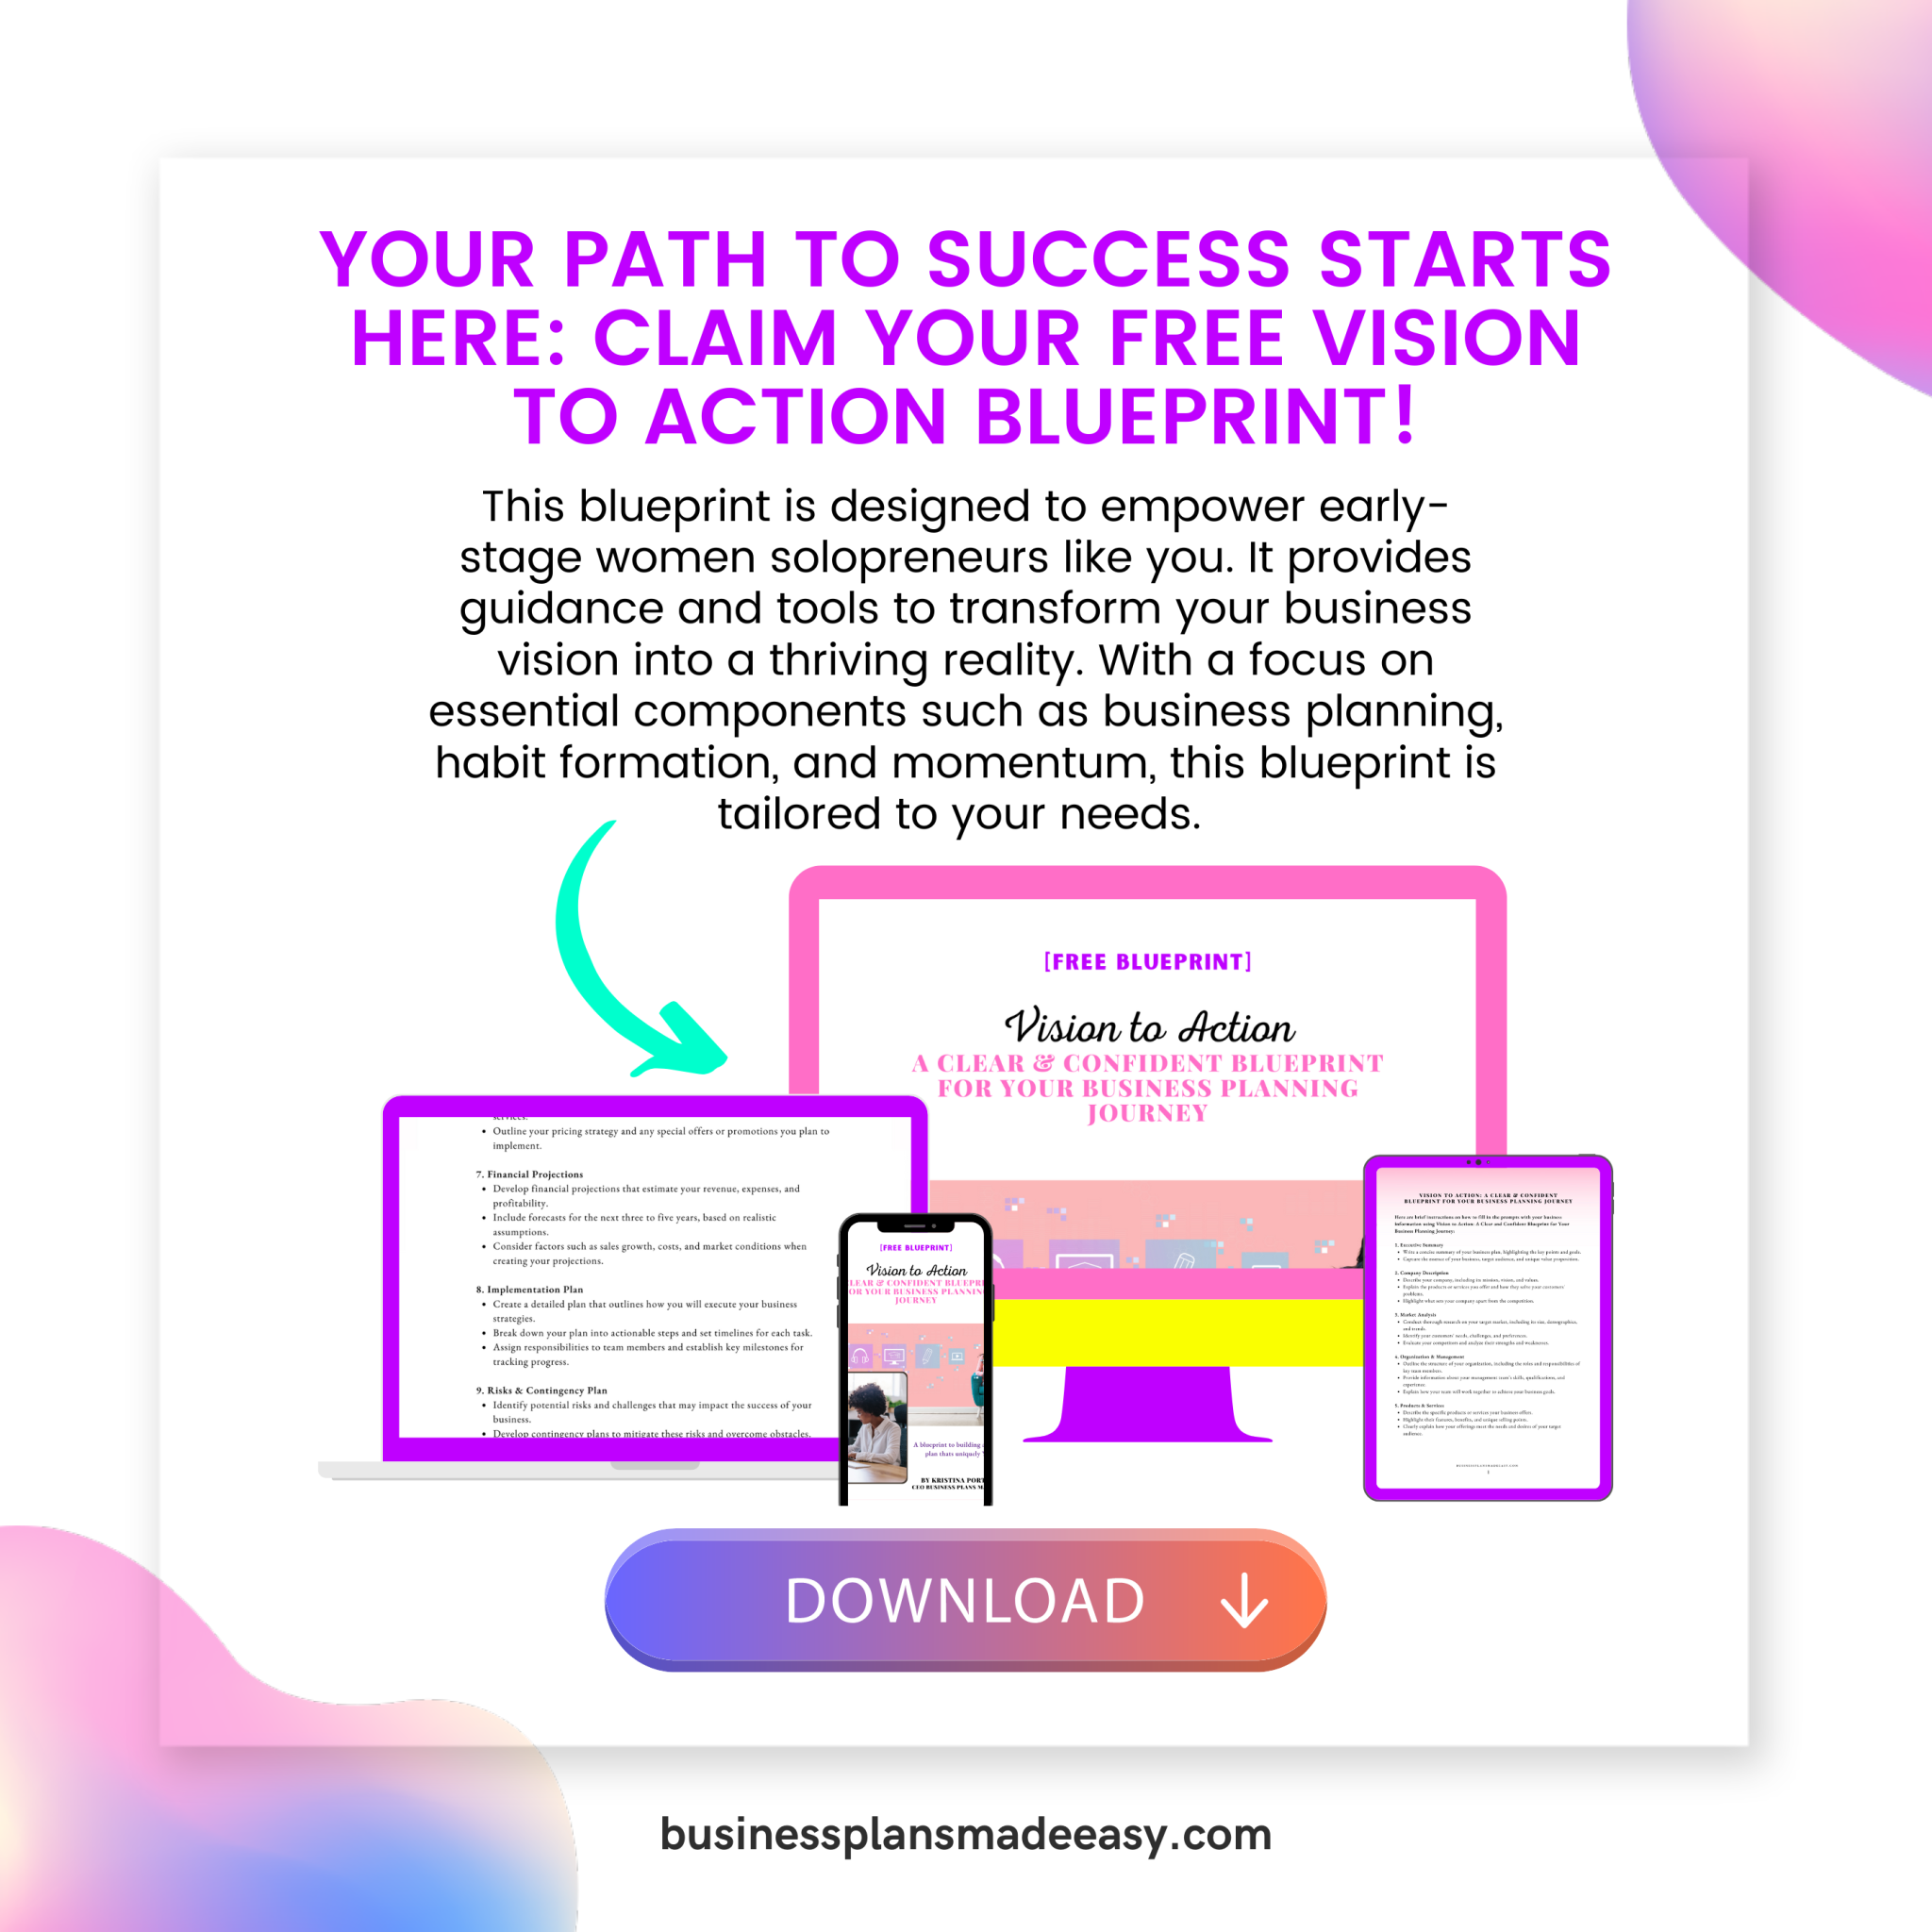 grab your free vision to action blueprint